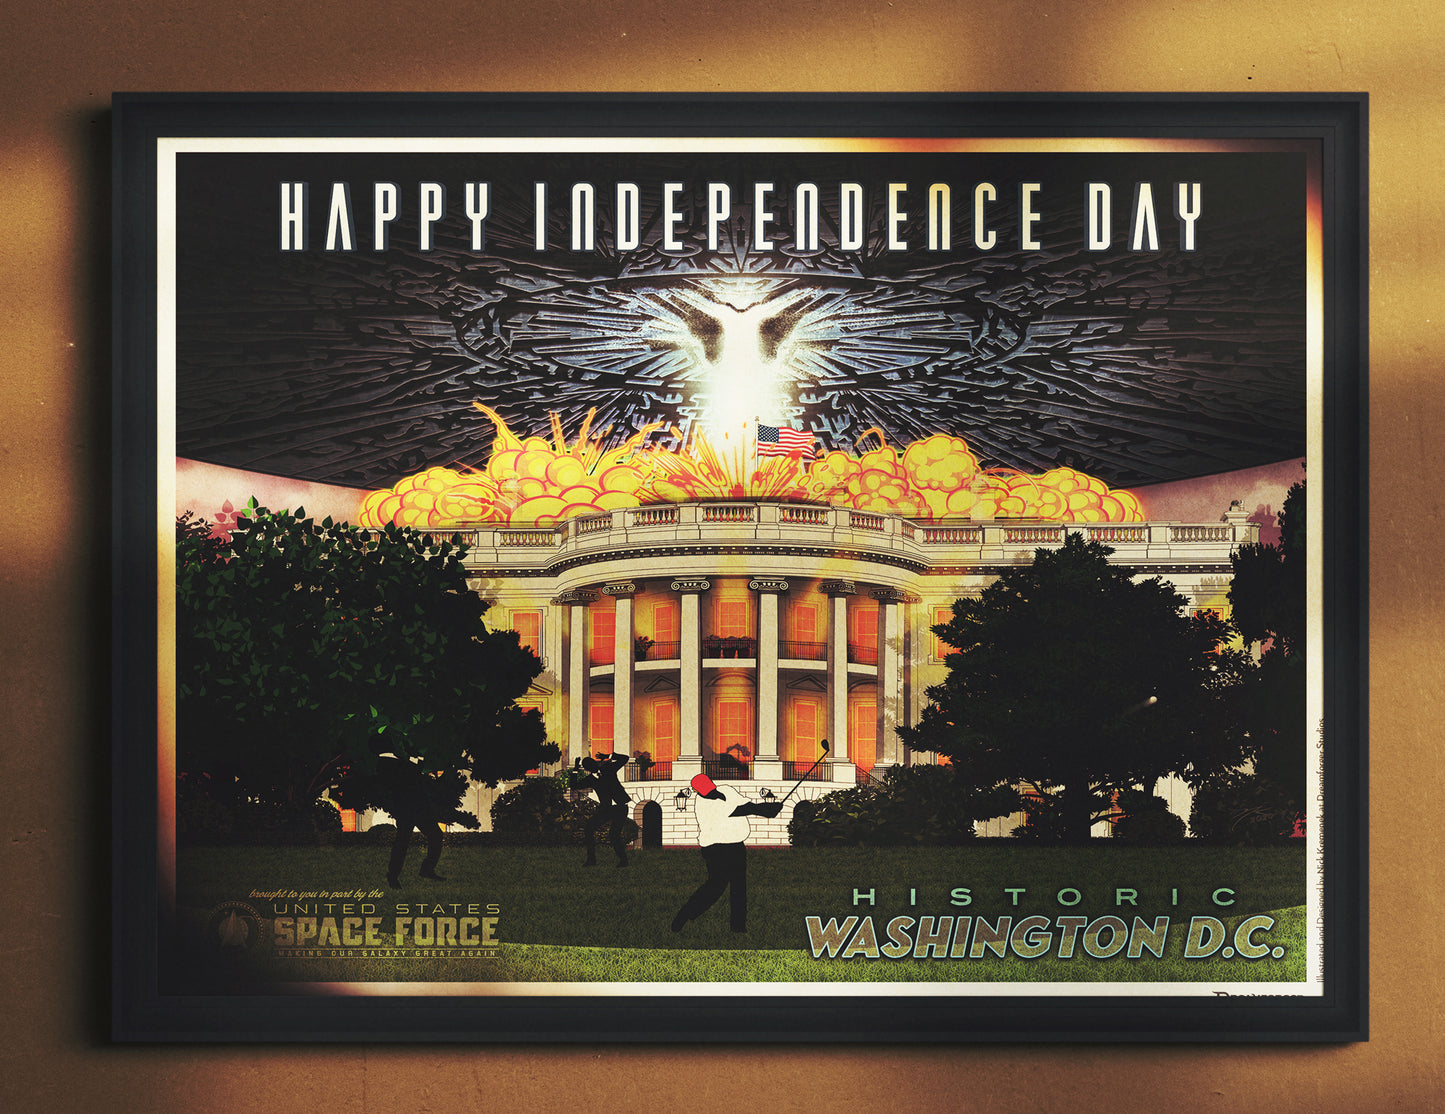 "Happy Independence Day from Historic Washington D.C." Art Print (SDCC@Home 2020 Exclusive)